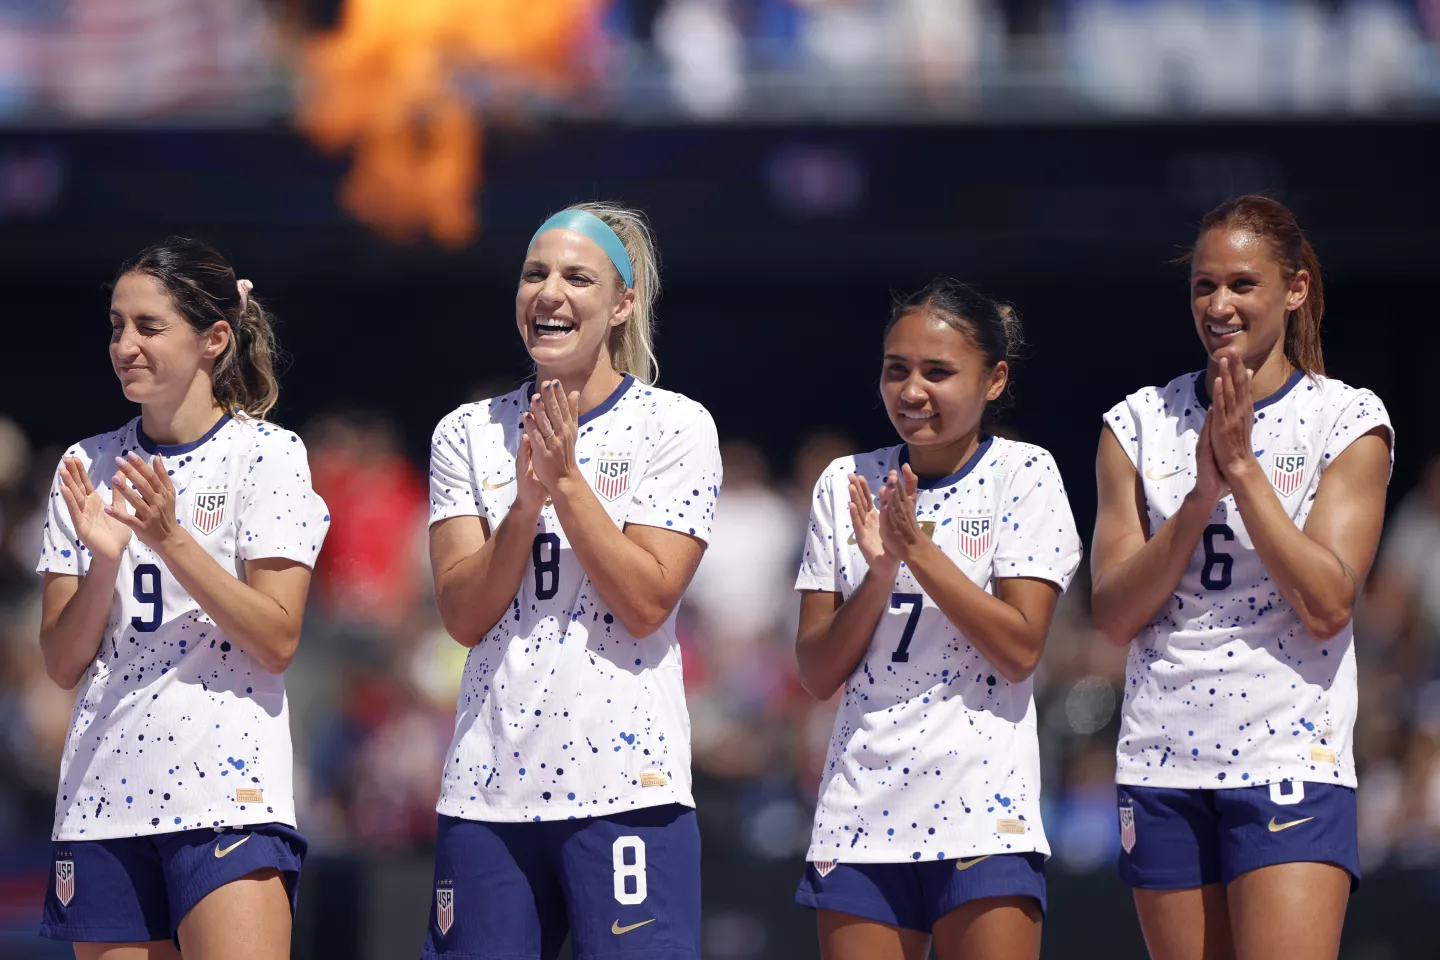 U.S. women’s national team players Savannah DeMelo, Julie Ertz, Alyssa Thompson and Lynn Williams acknowledge their fans after a win over Wales in an international friendly match in July.